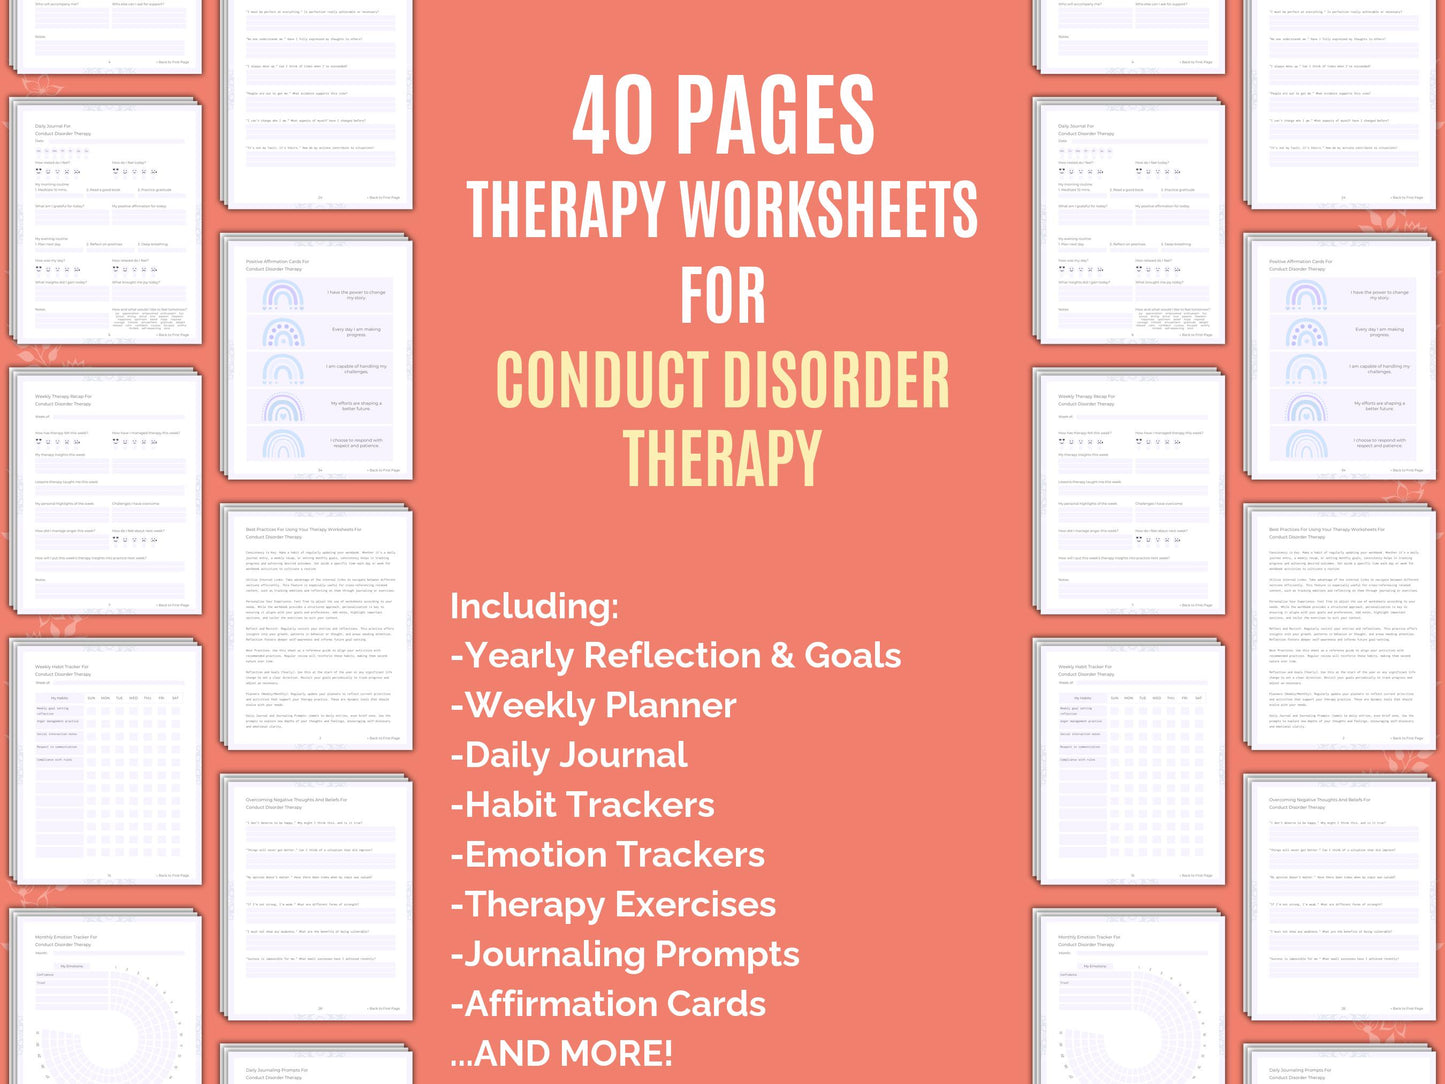 Conduct Resources, Disorder, Conduct Planners, Conduct Tools, Conduct Journals, Conduct Workbooks, Conduct Therapy, Conduct Counseling, Conduct Cheat Sheet, Conduct Goal Setting, Conduct Notes, Conduct Journaling, Conduct Templates